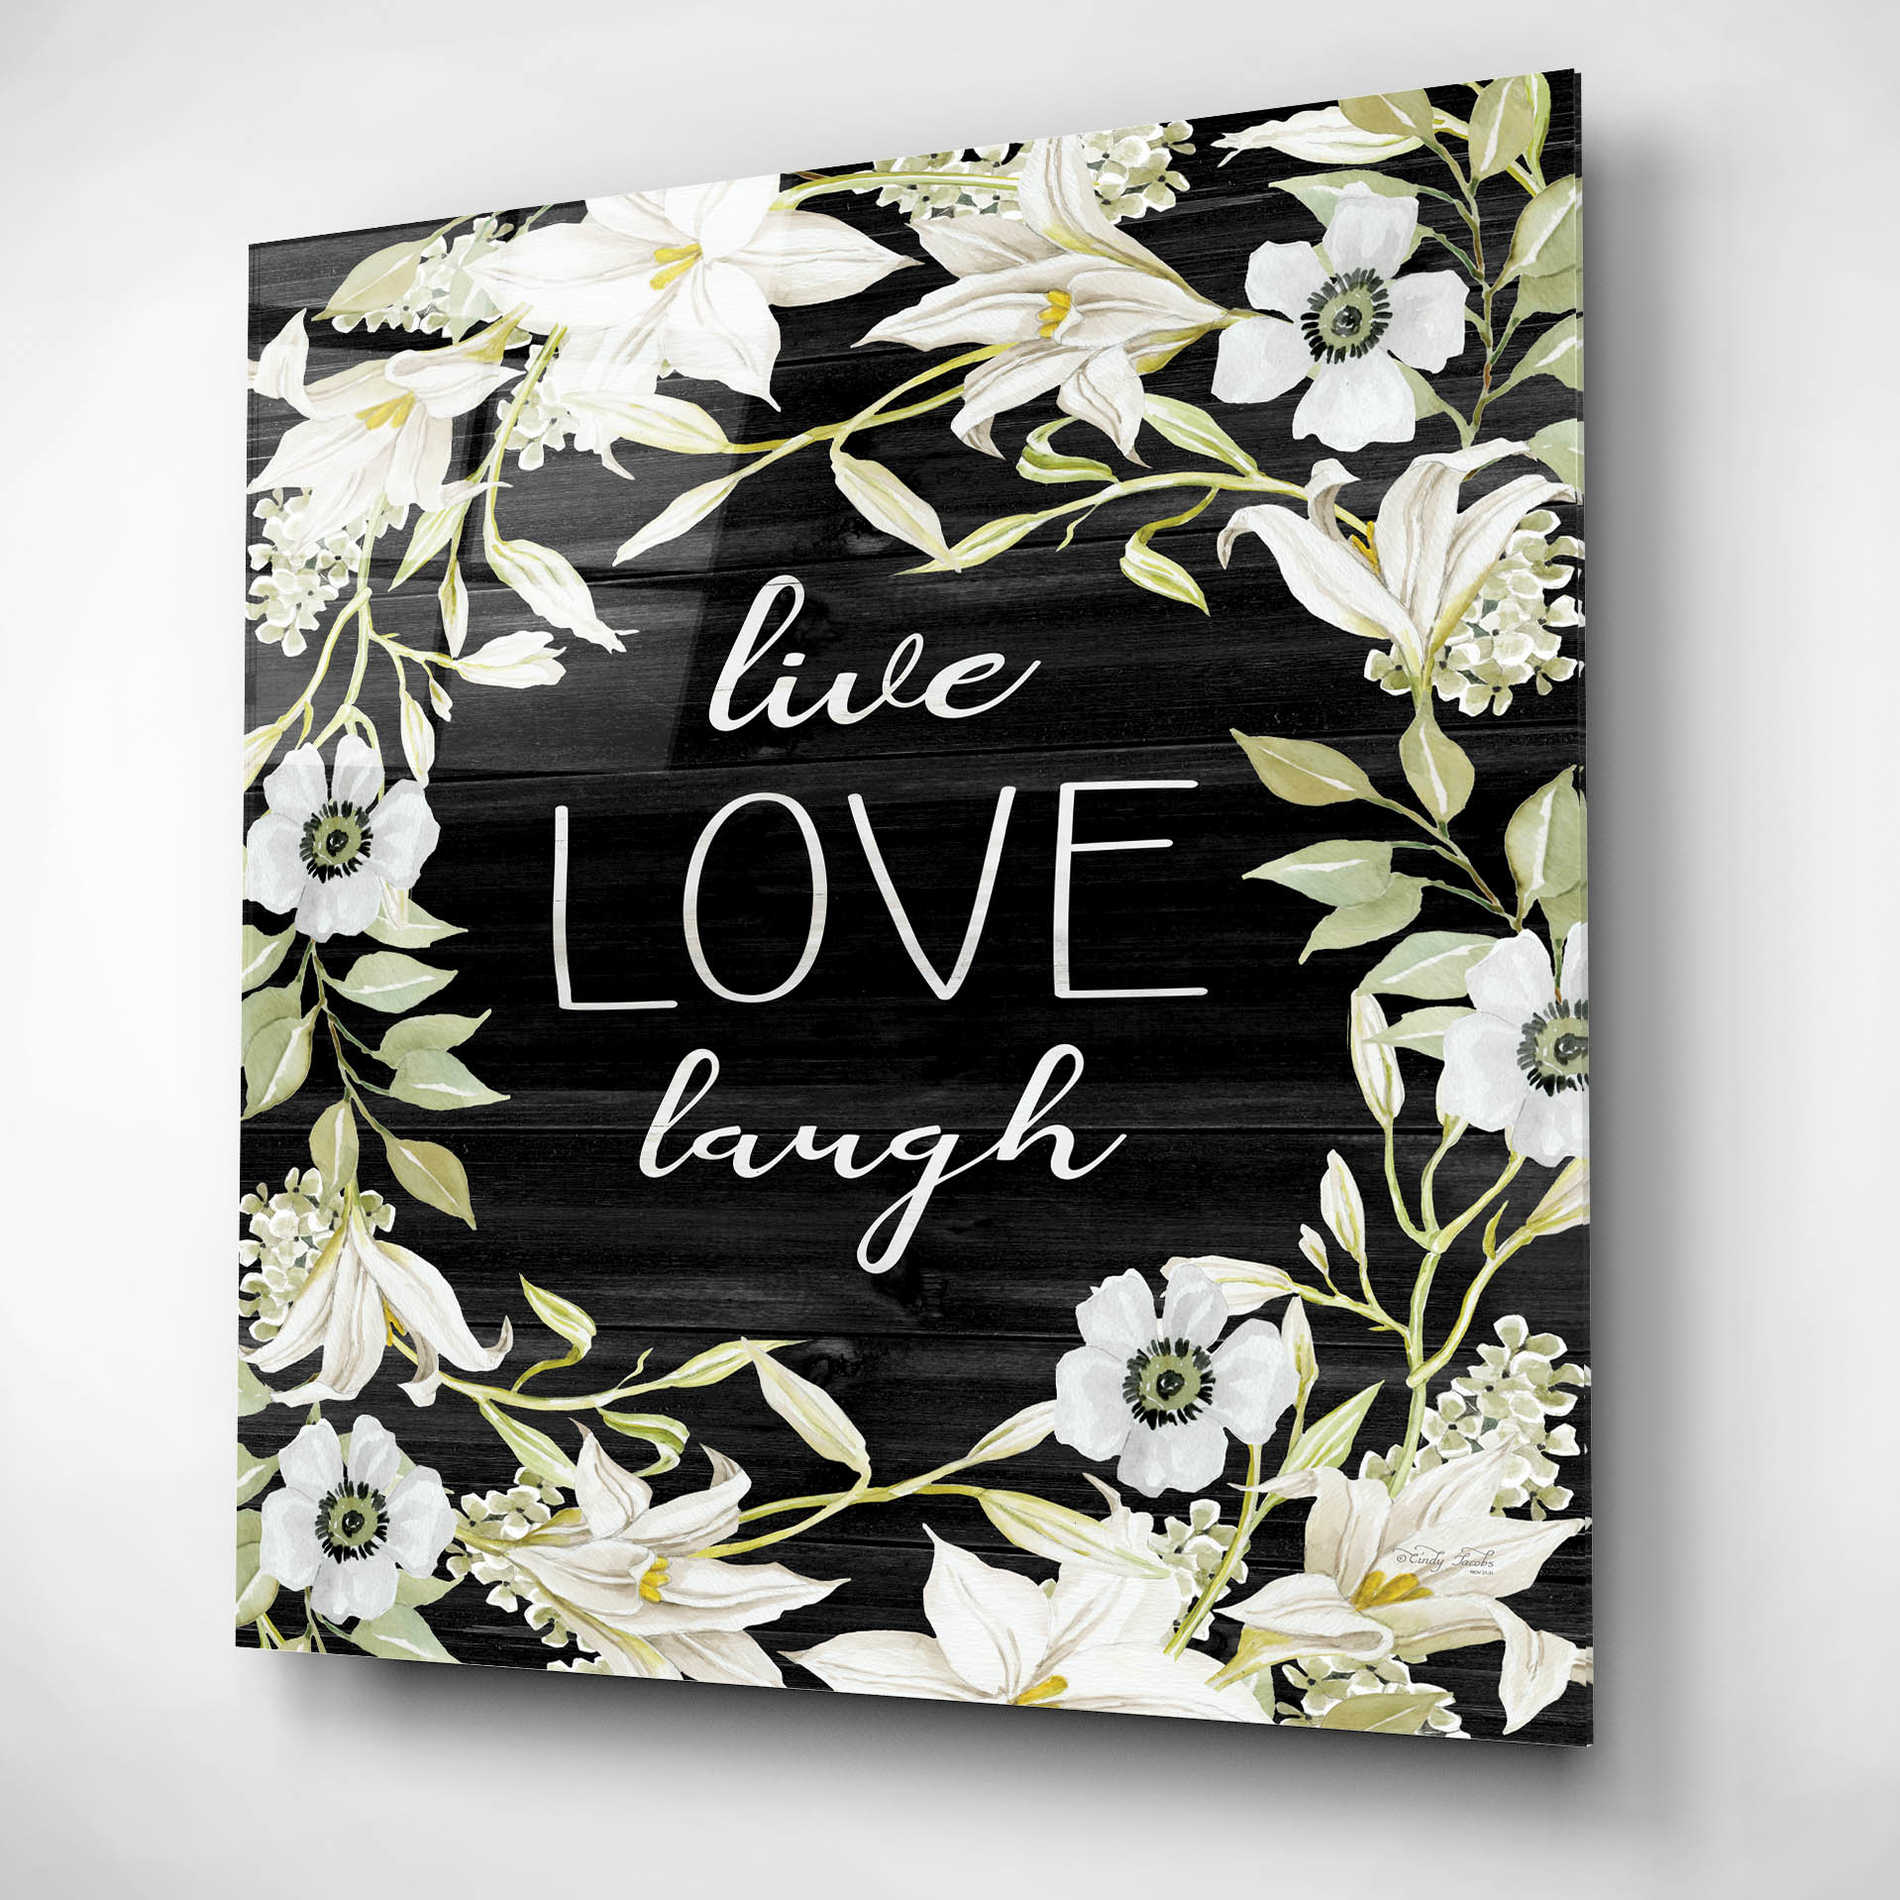 Epic Art 'Live, Love, Laugh' by Cindy Jacobs, Acrylic Glass Wall Art,12x12